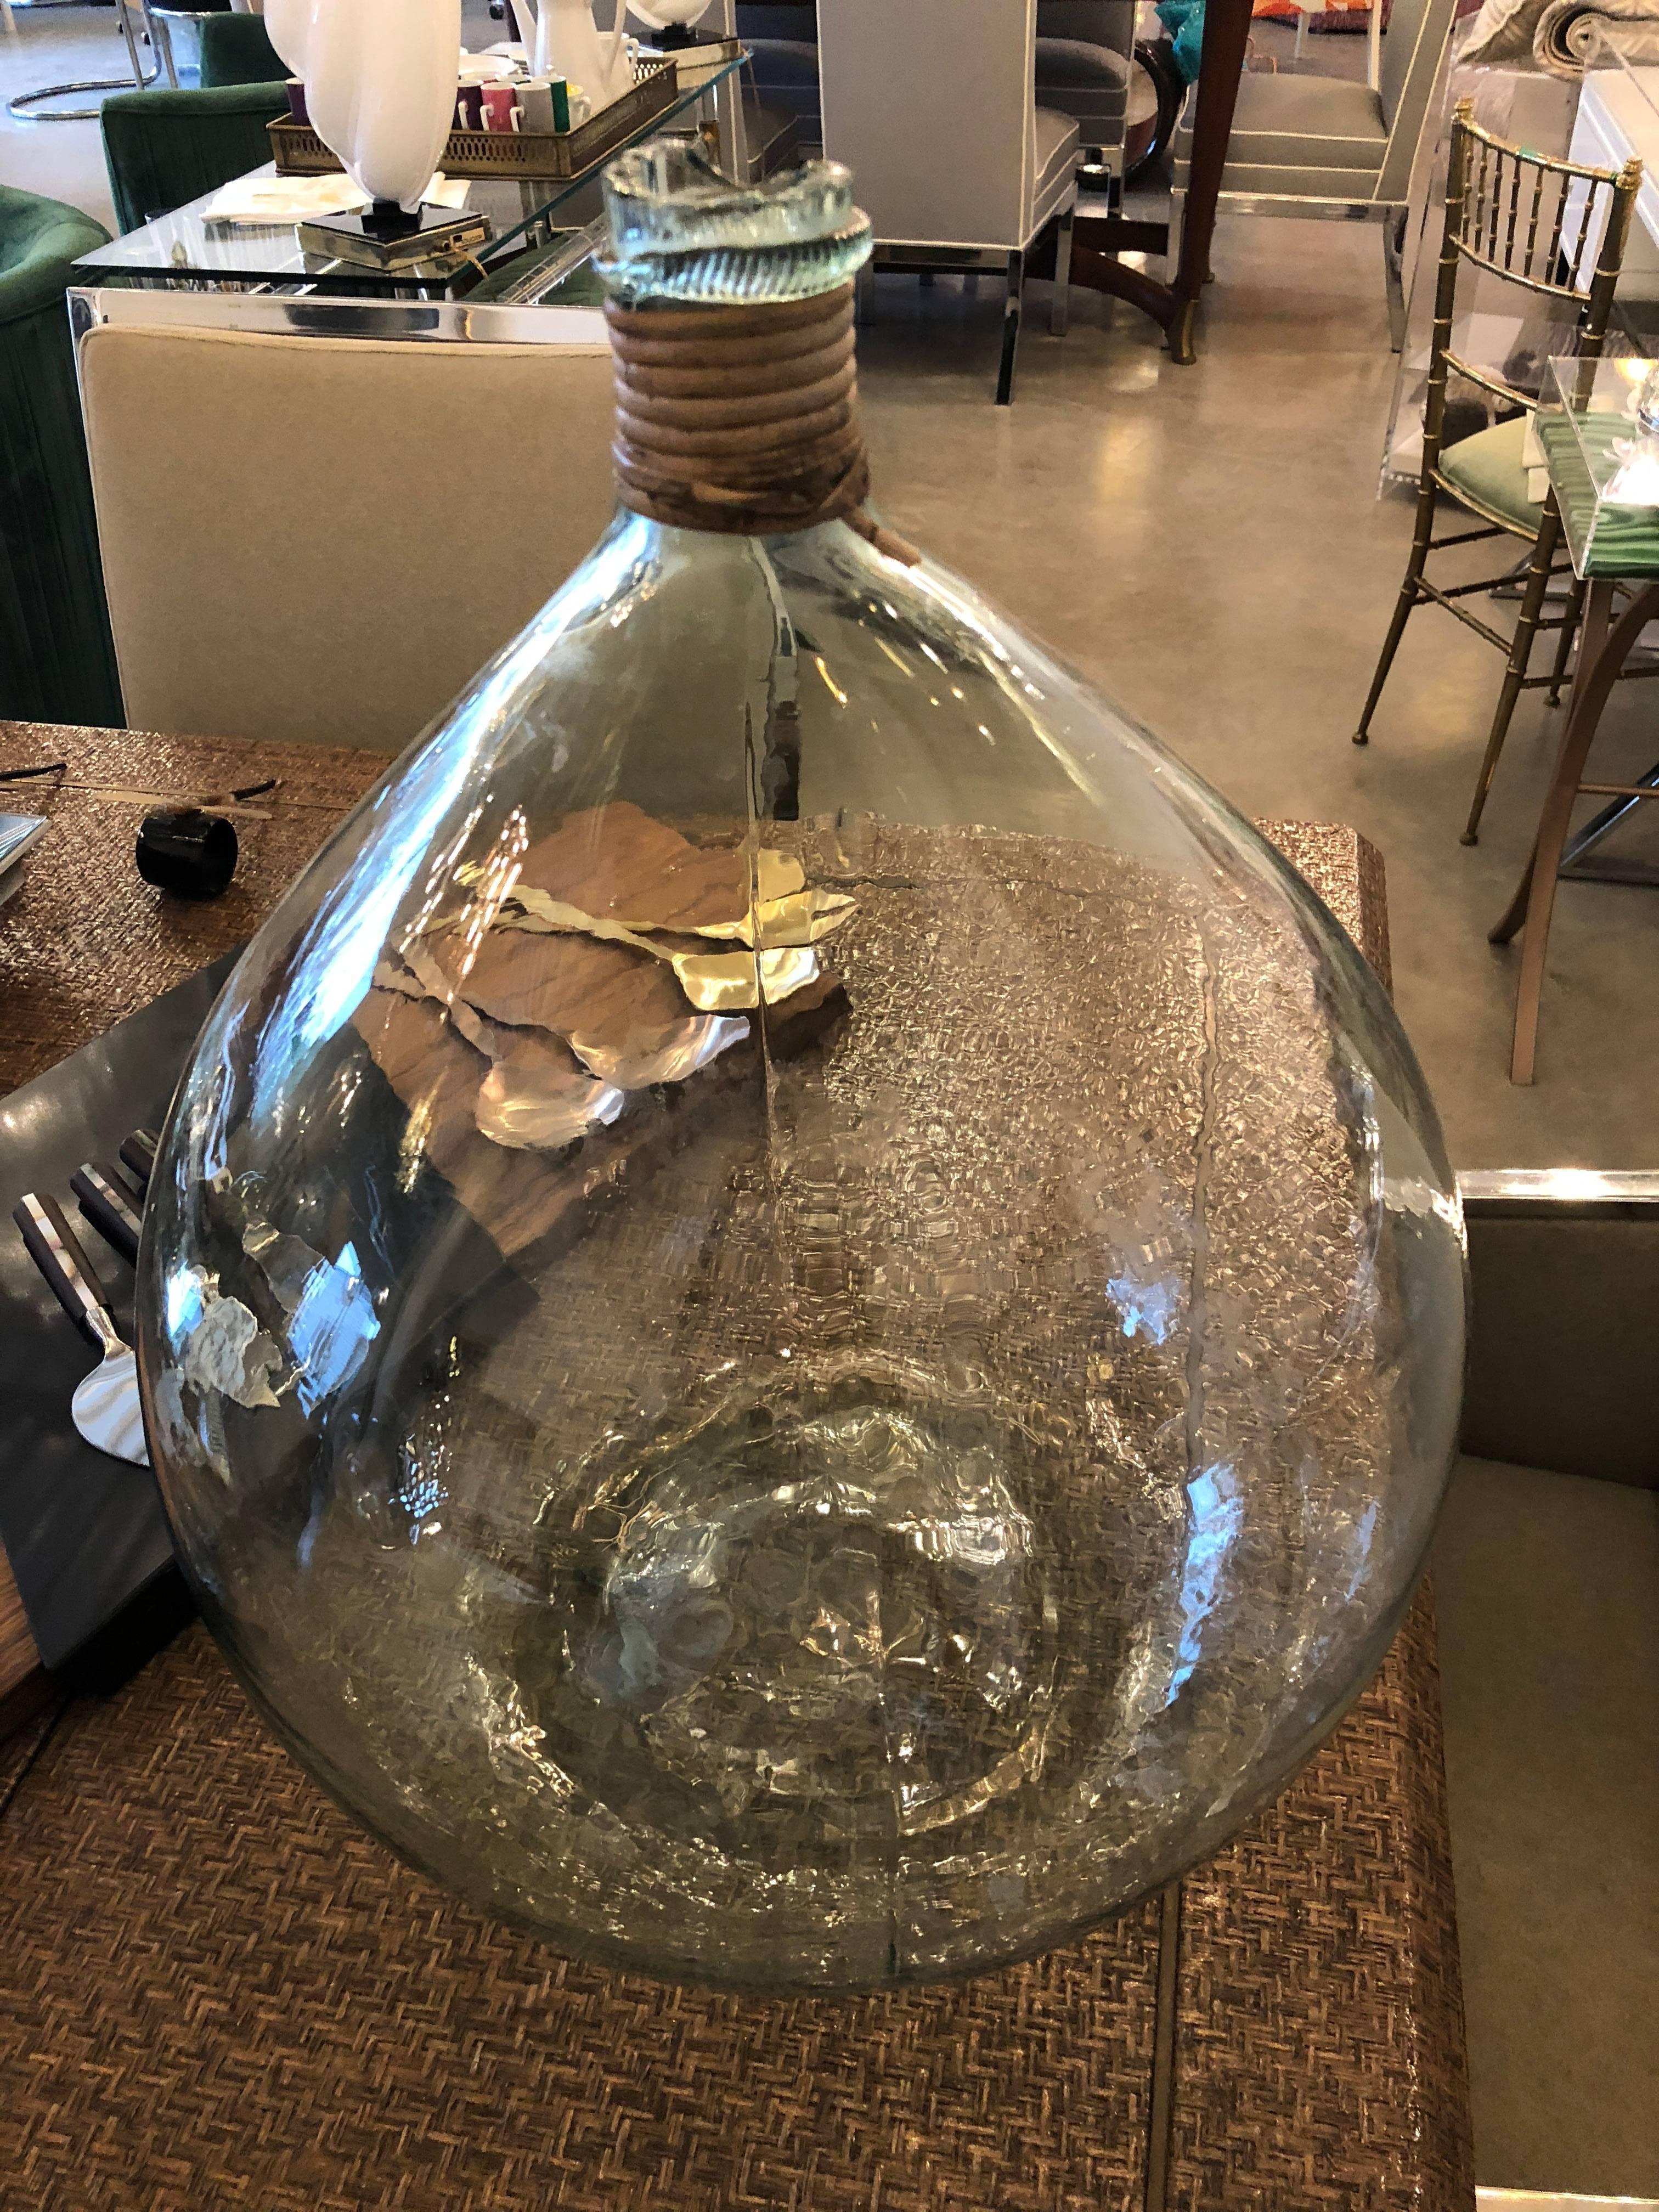 Offered is a mid century modern Argentine handblown aqua / light green glass demijohn wine jug.  The large pear shaped handblown wine storage vessel has an everted lip and cane wrapped neck.